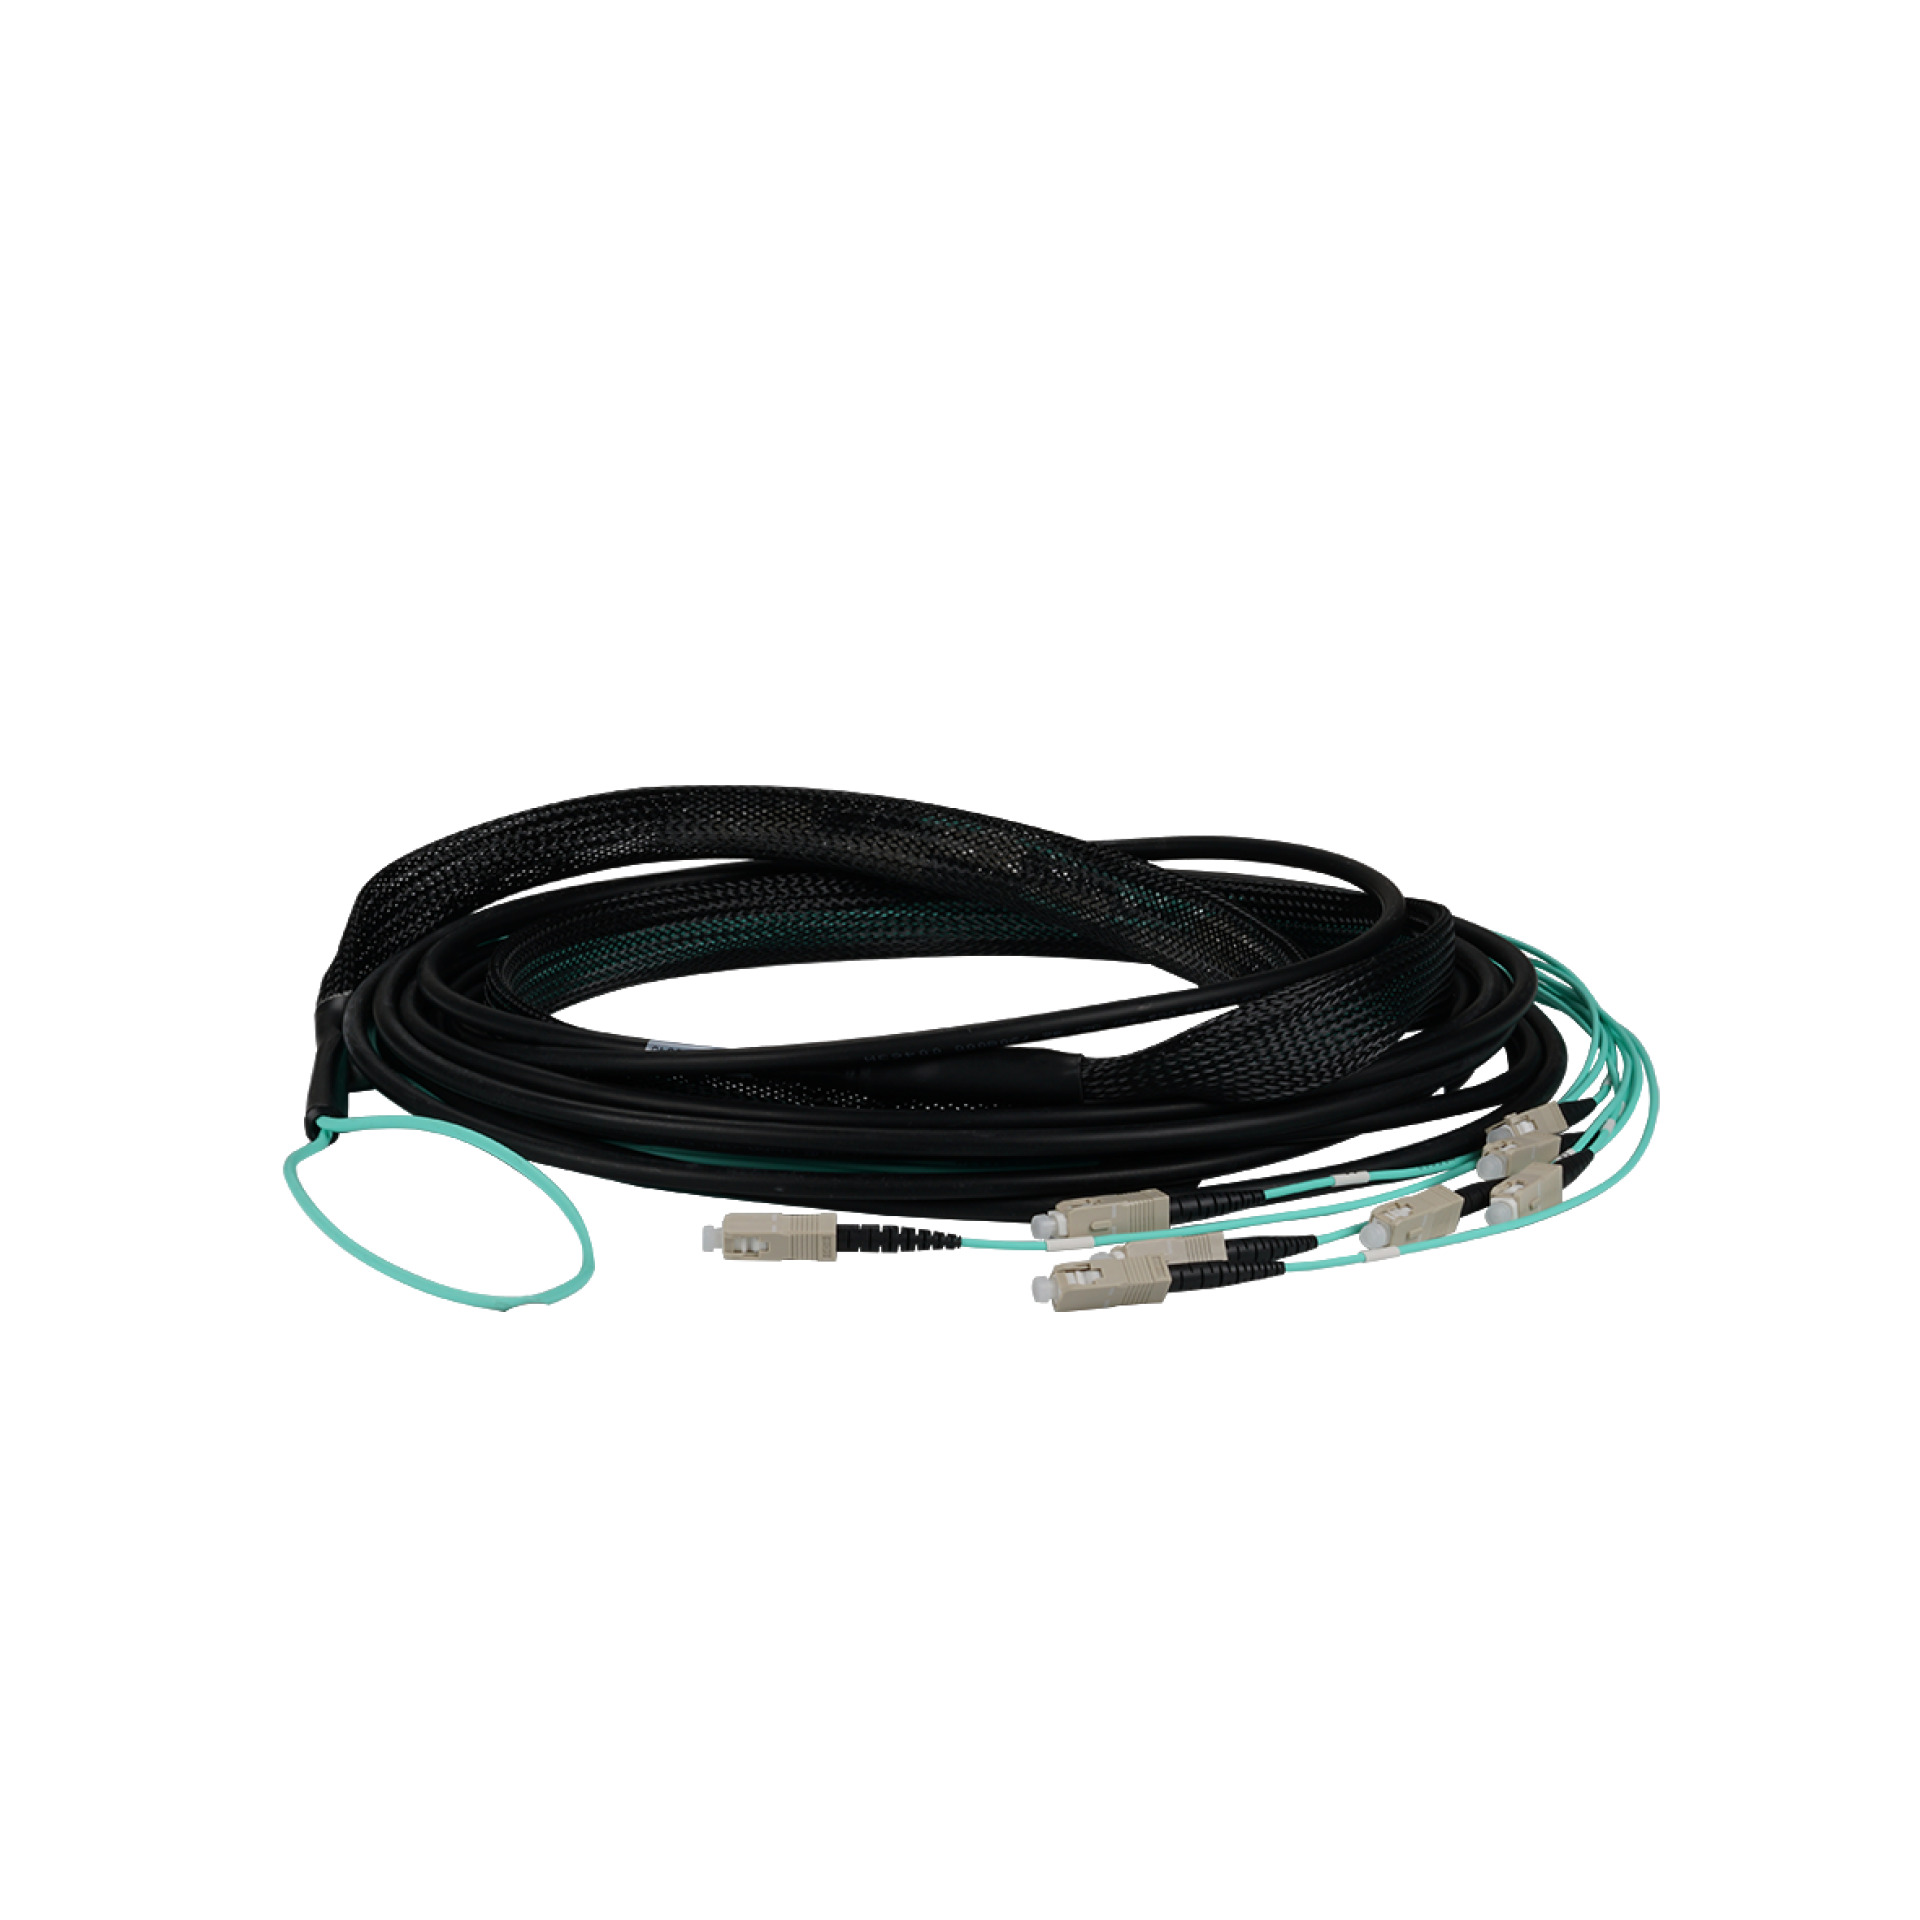 Trunk cable U-DQ(ZN)BH 8G 50/125, SC/SC OM3 30m